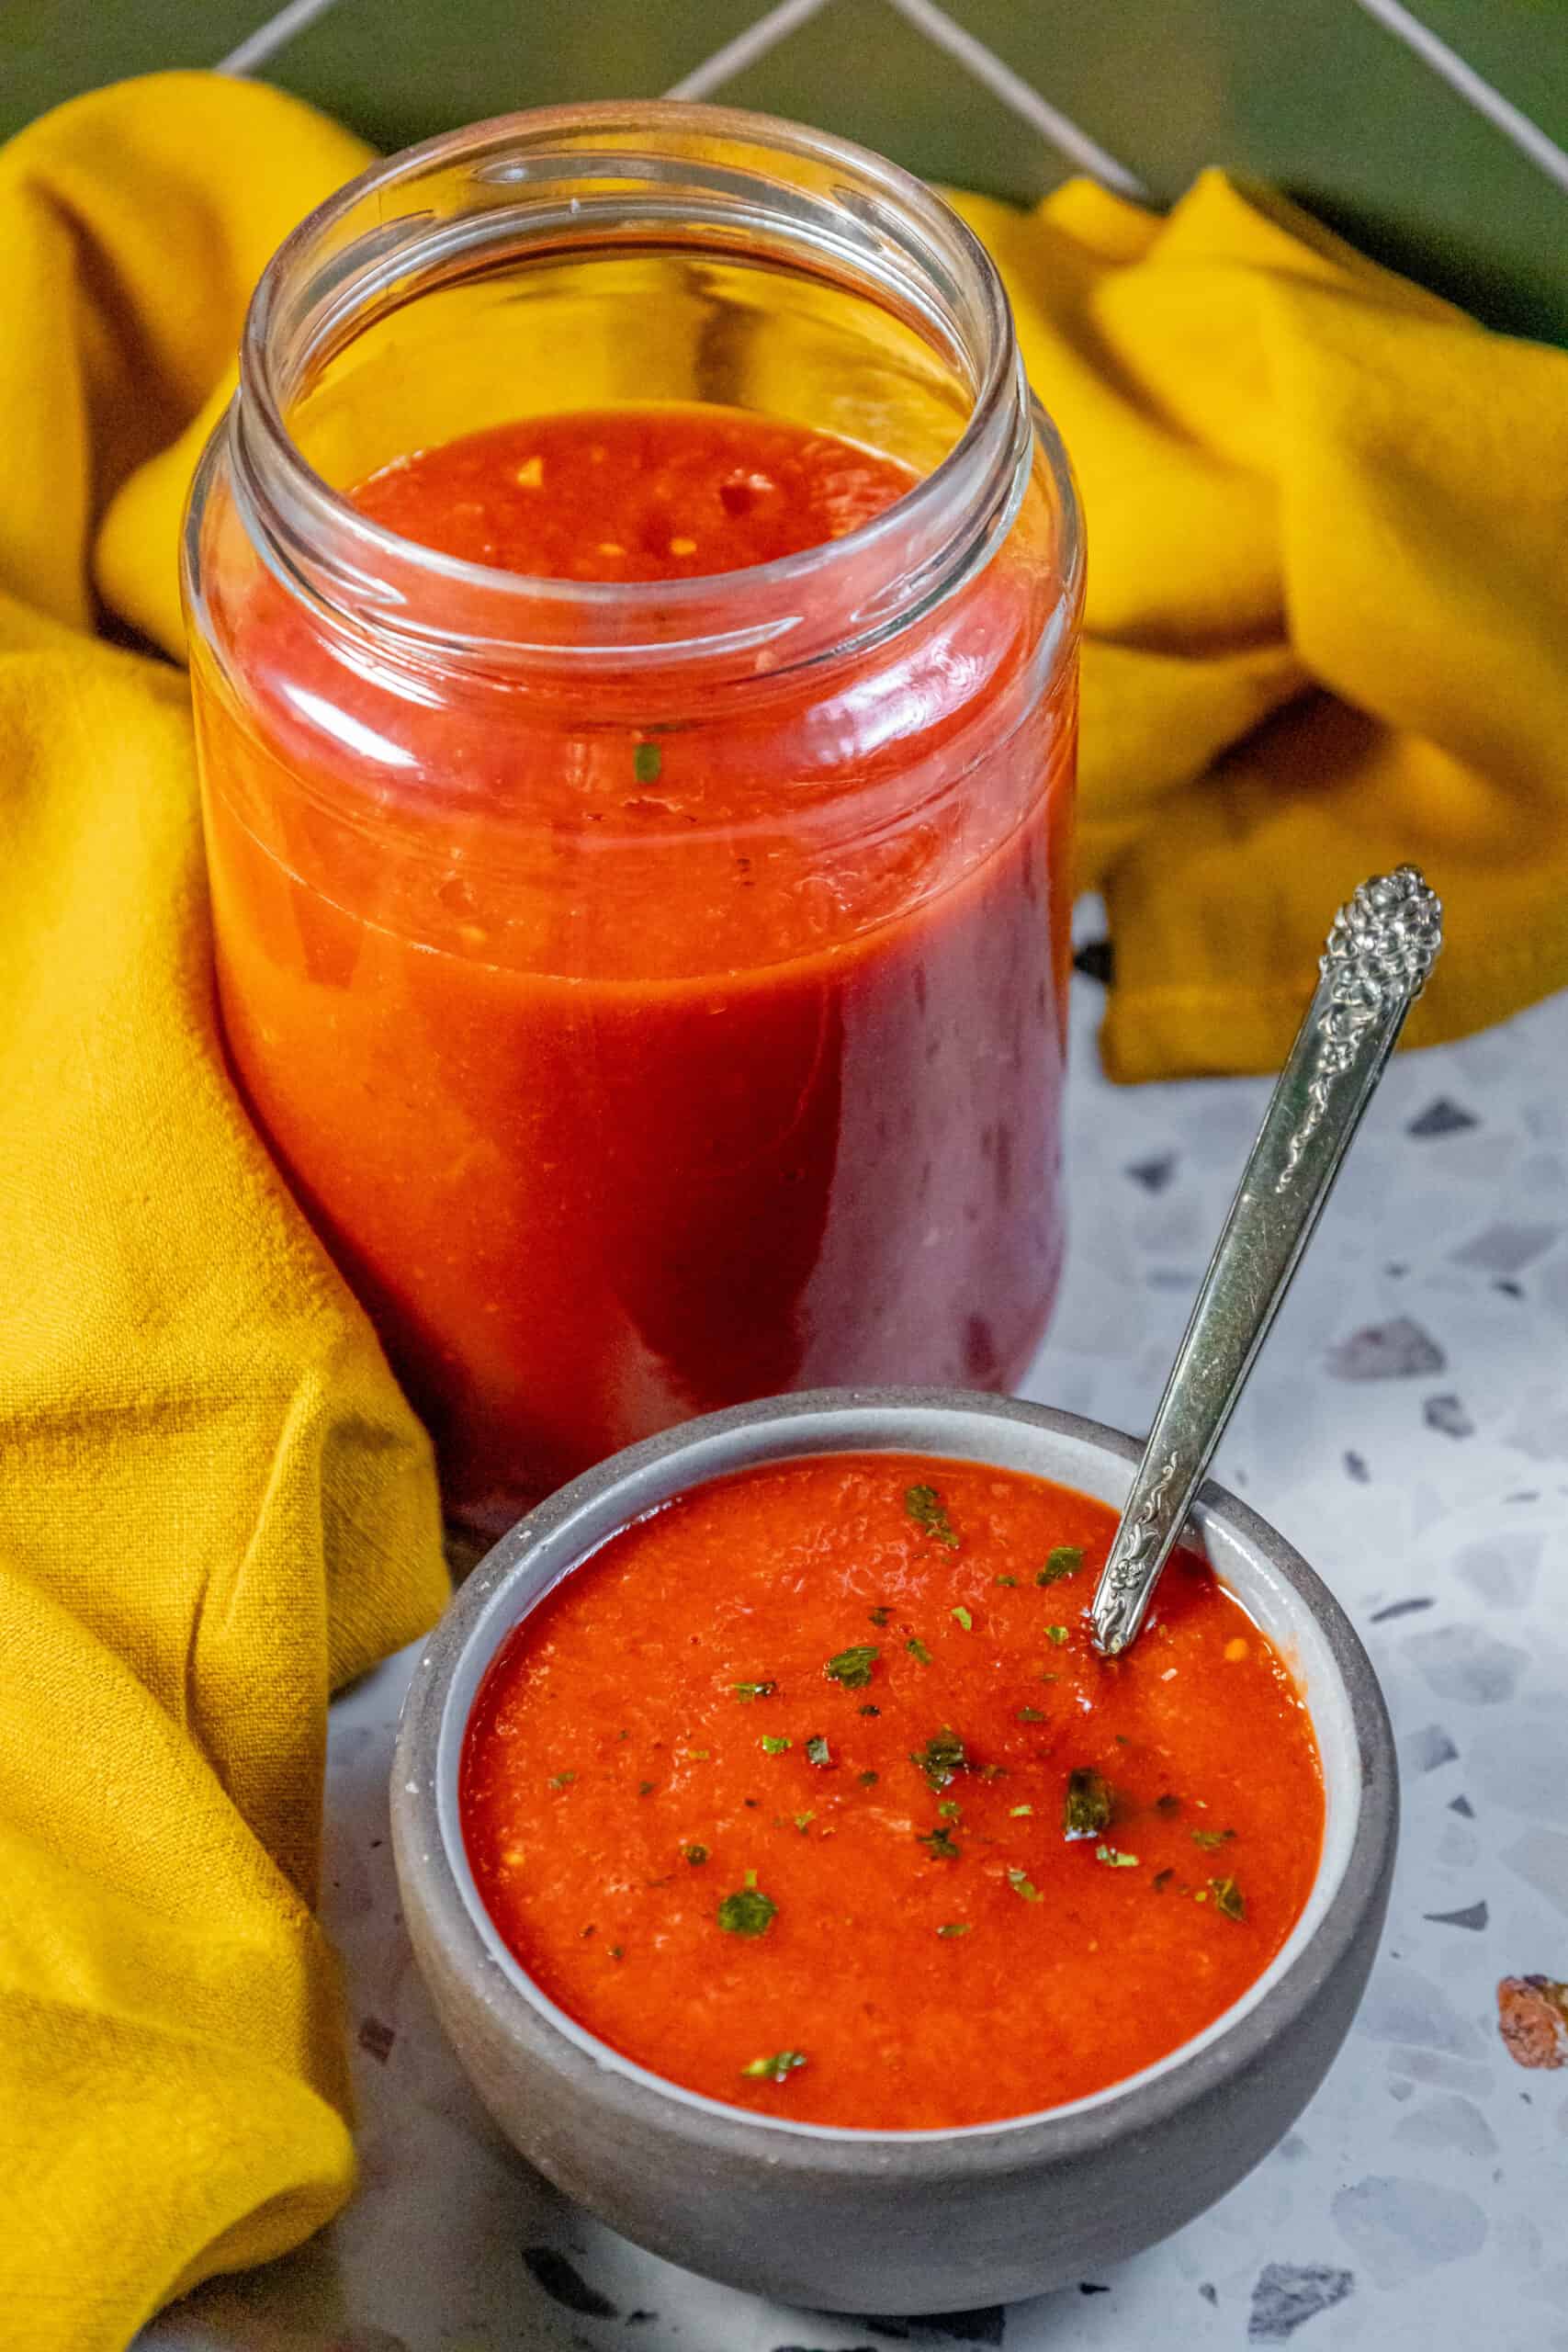 A jar of Margherita tomato sauce with a spoon next to it.